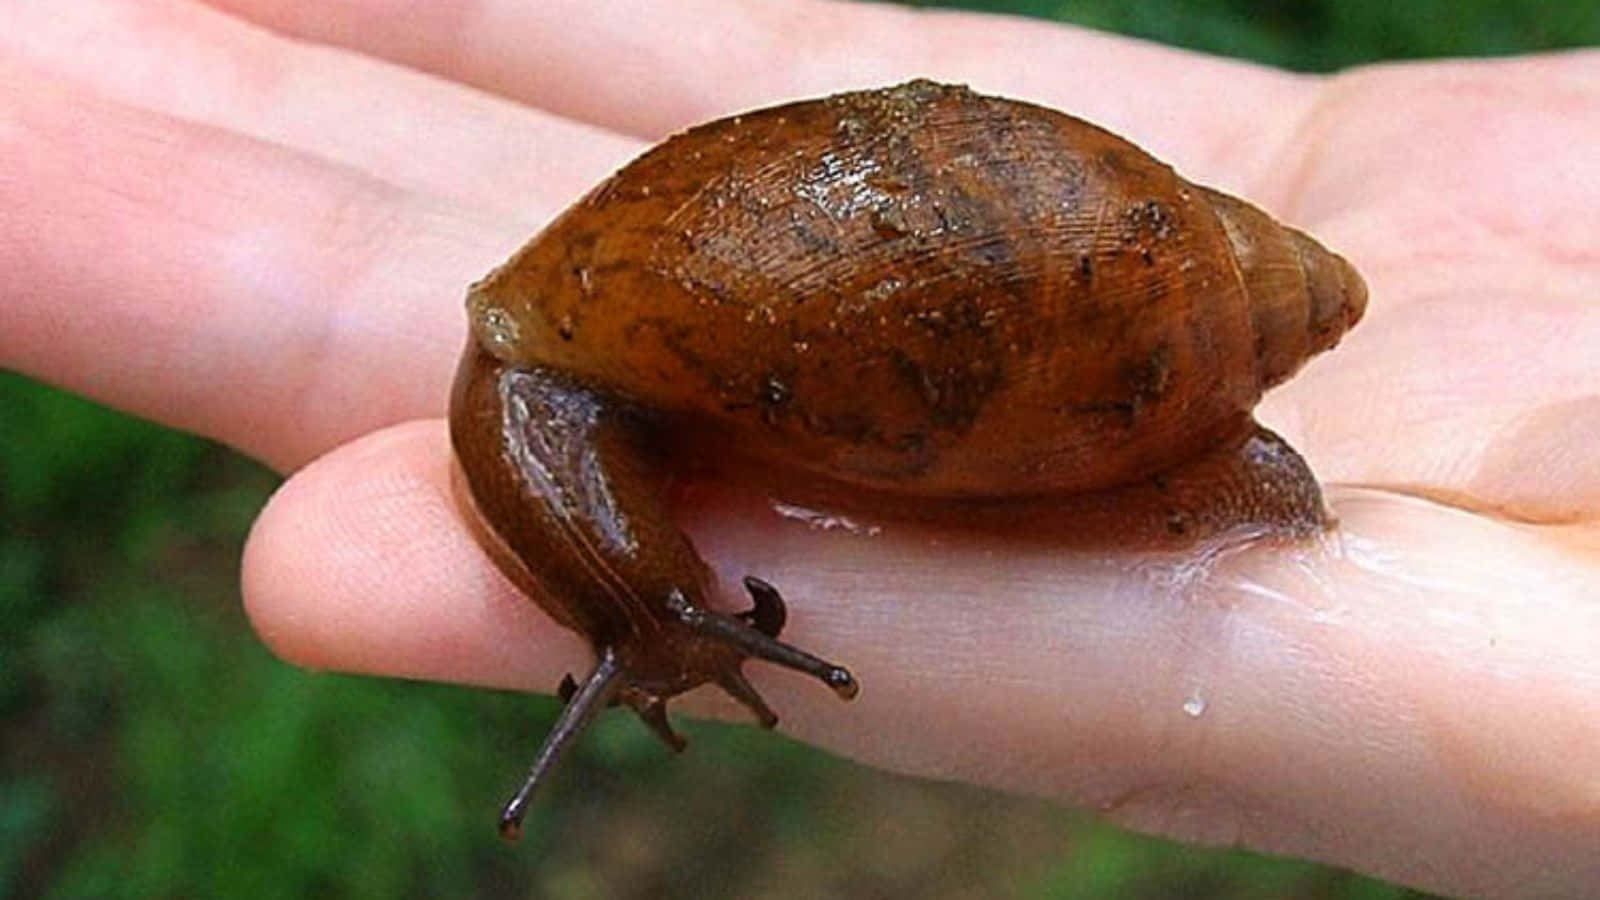 A Snail Is Sitting On A Person's Hand